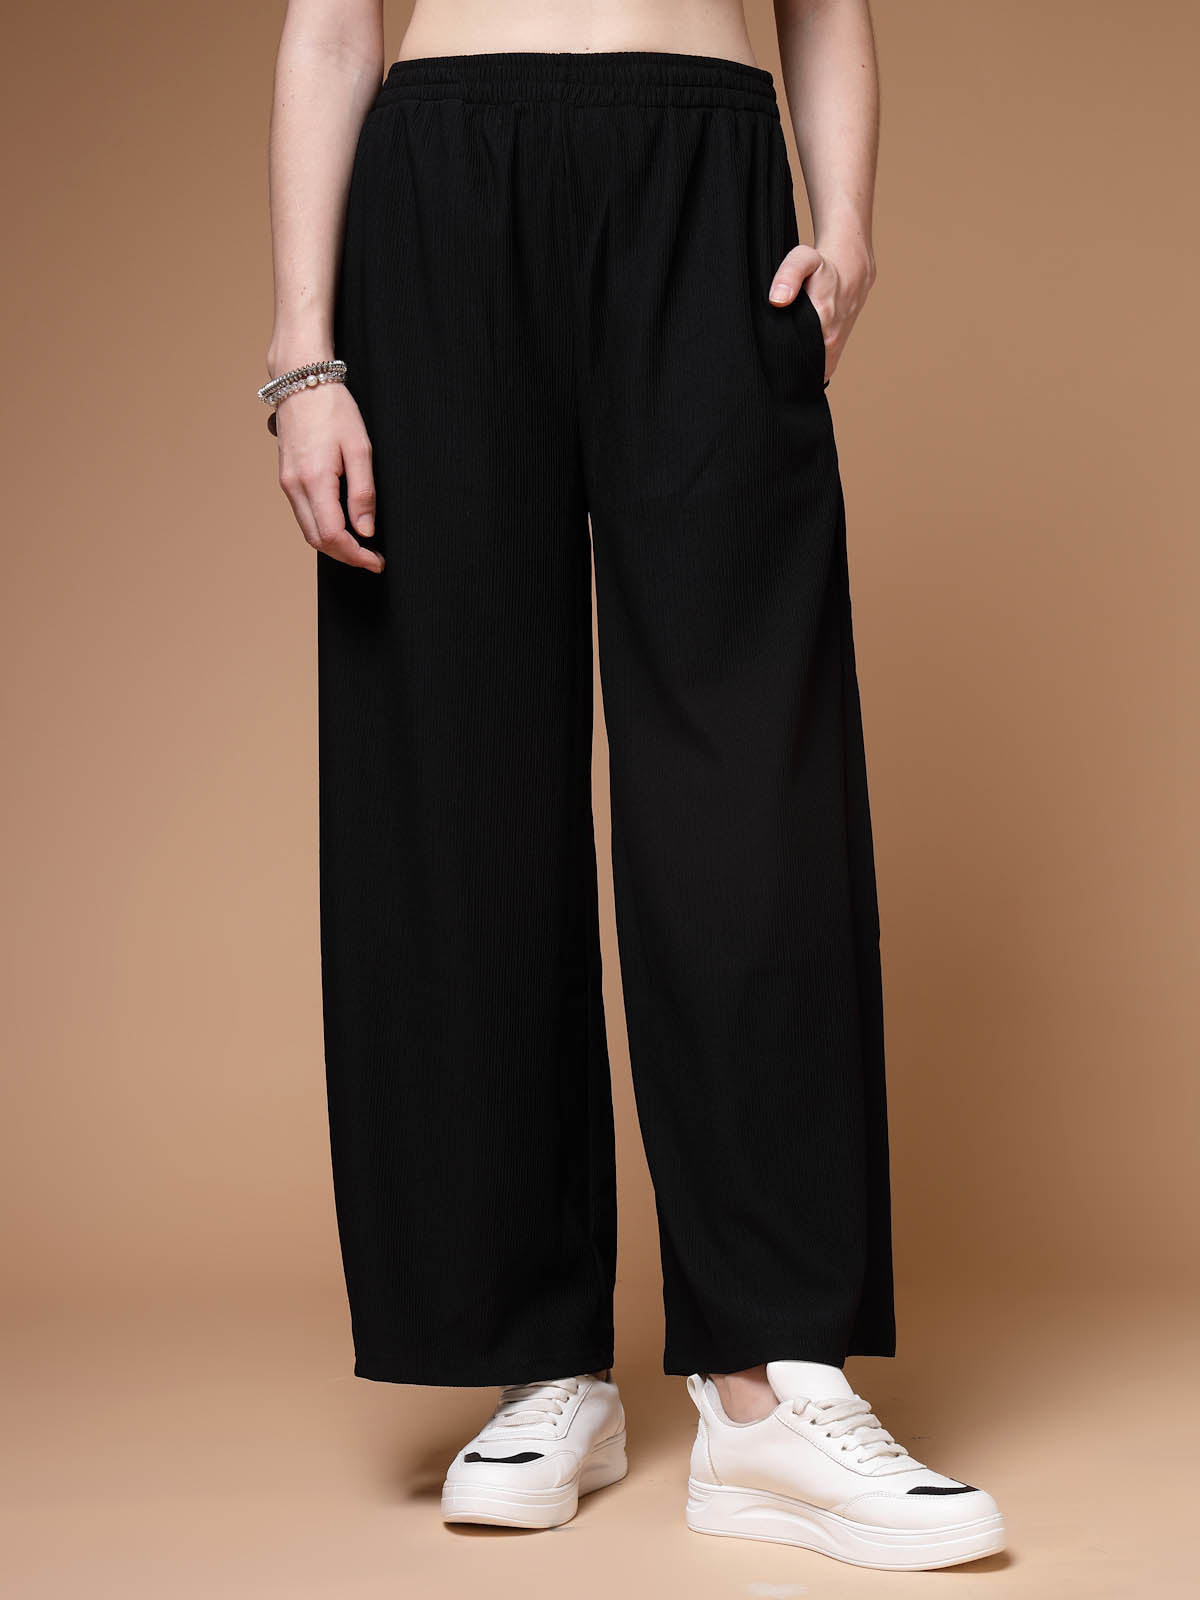 KNOT PARALLEL PANTS BLACK COLOR RAYON FABRIC BIOWASH @SHE BRAND OFFICIAL